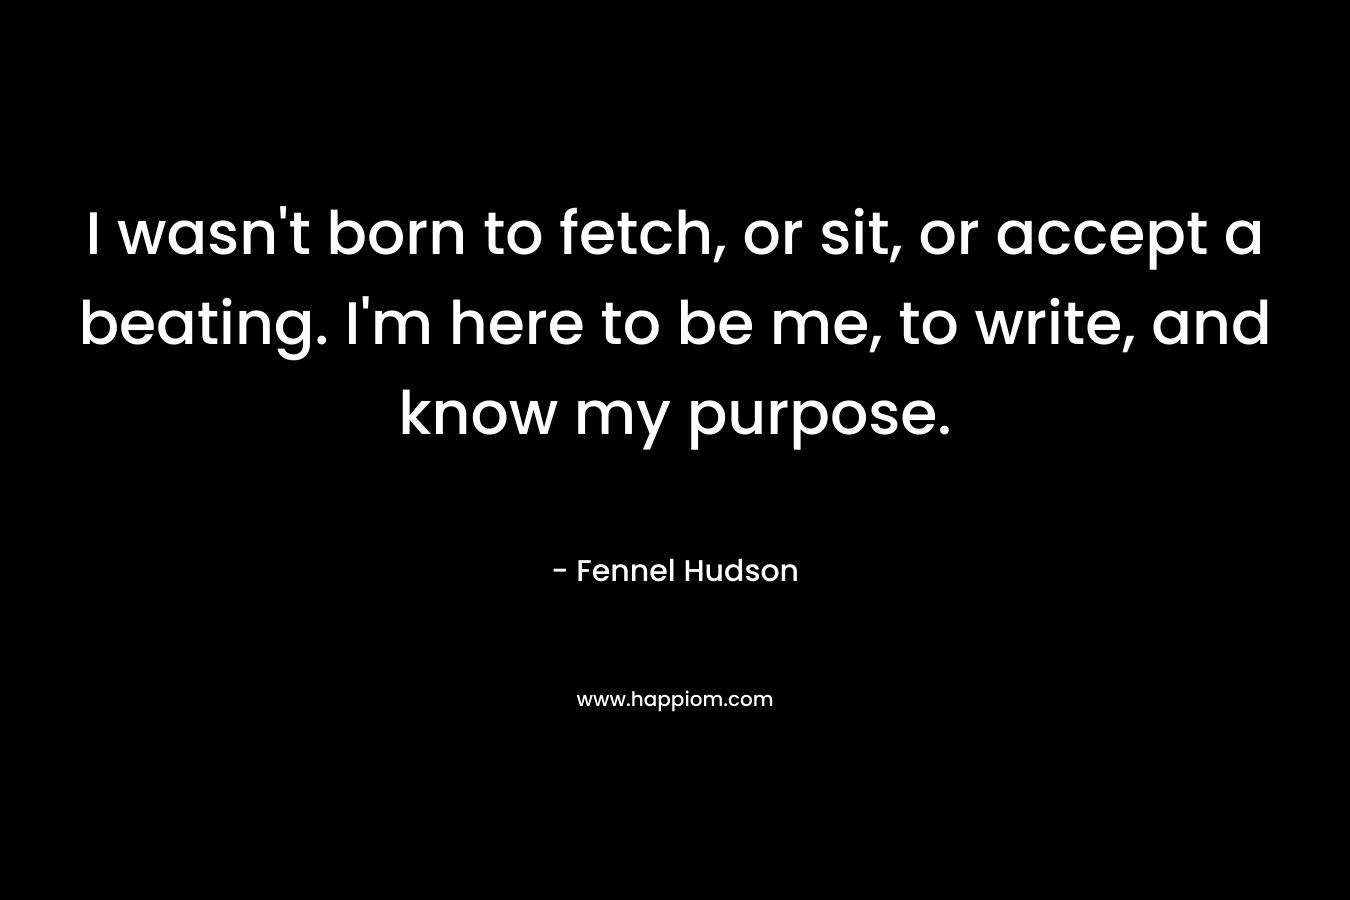 I wasn't born to fetch, or sit, or accept a beating. I'm here to be me, to write, and know my purpose.